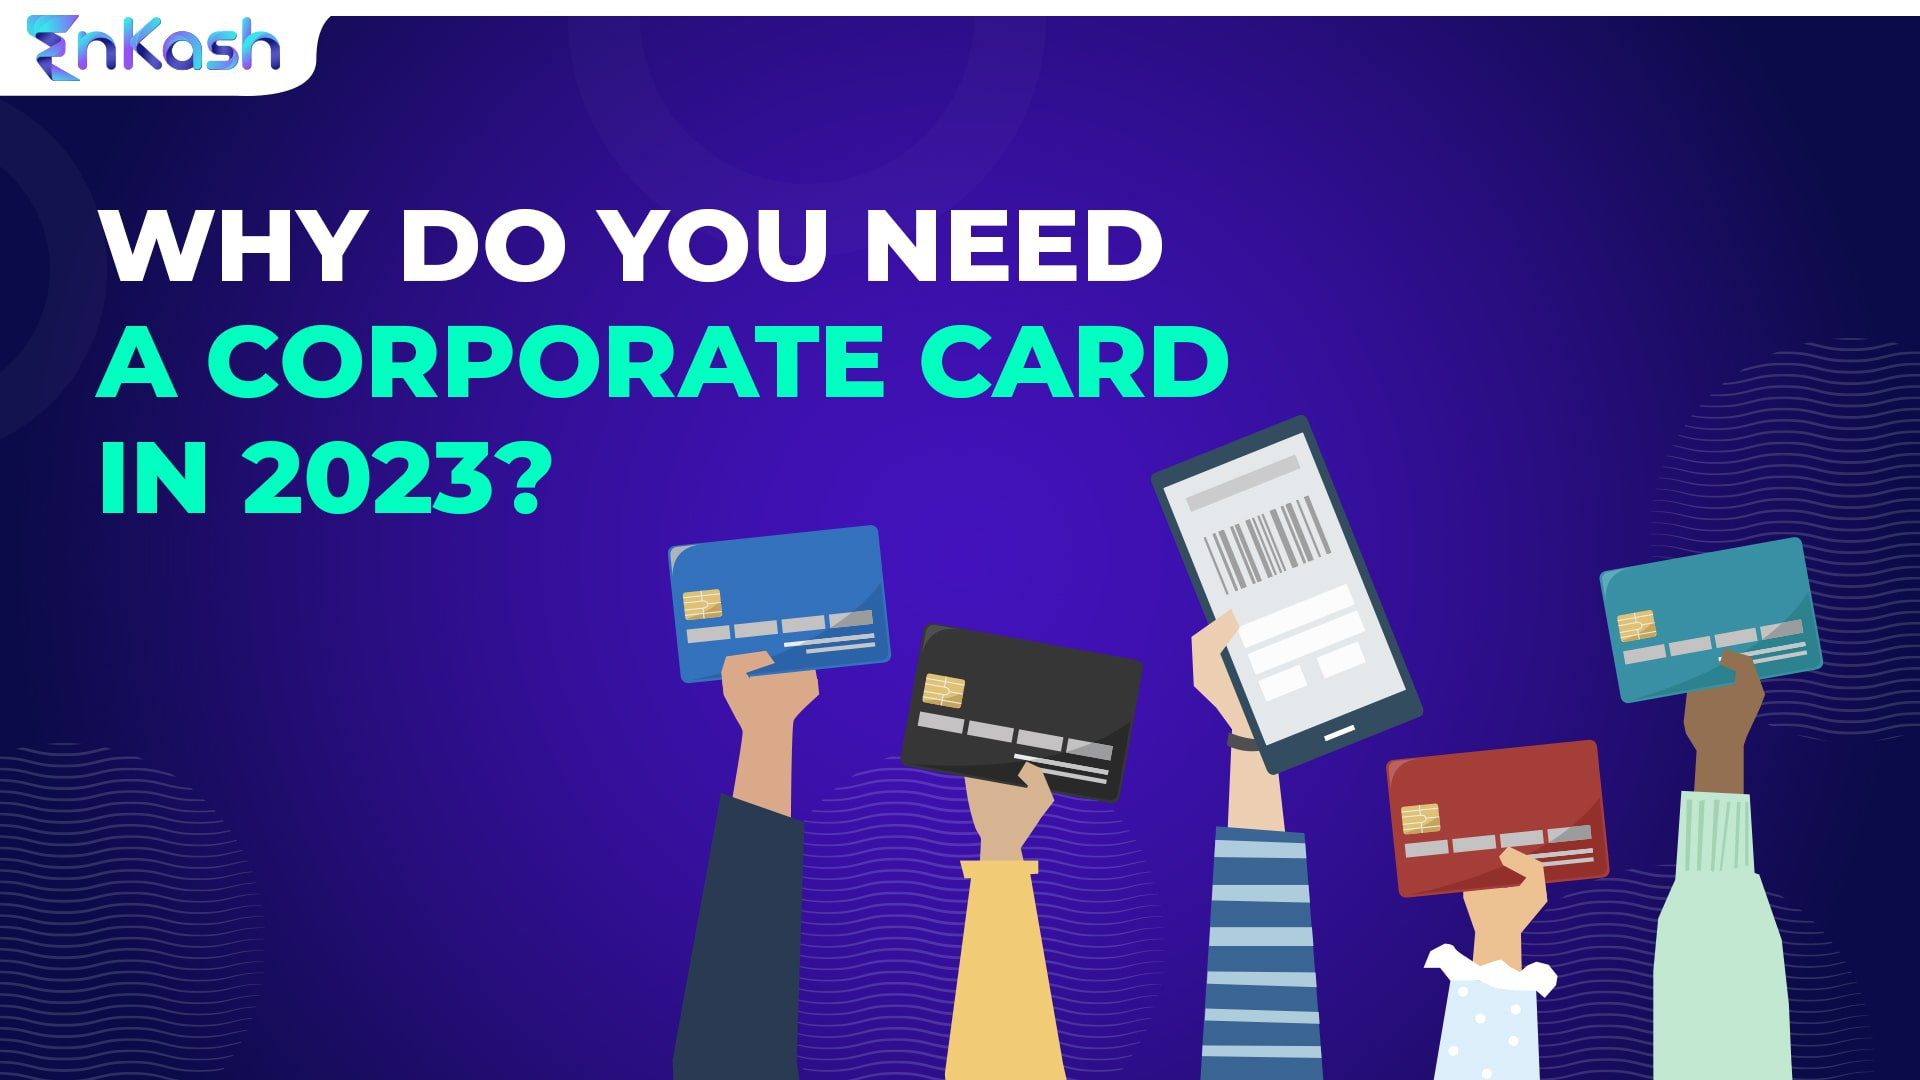 Why do you need a corporate card